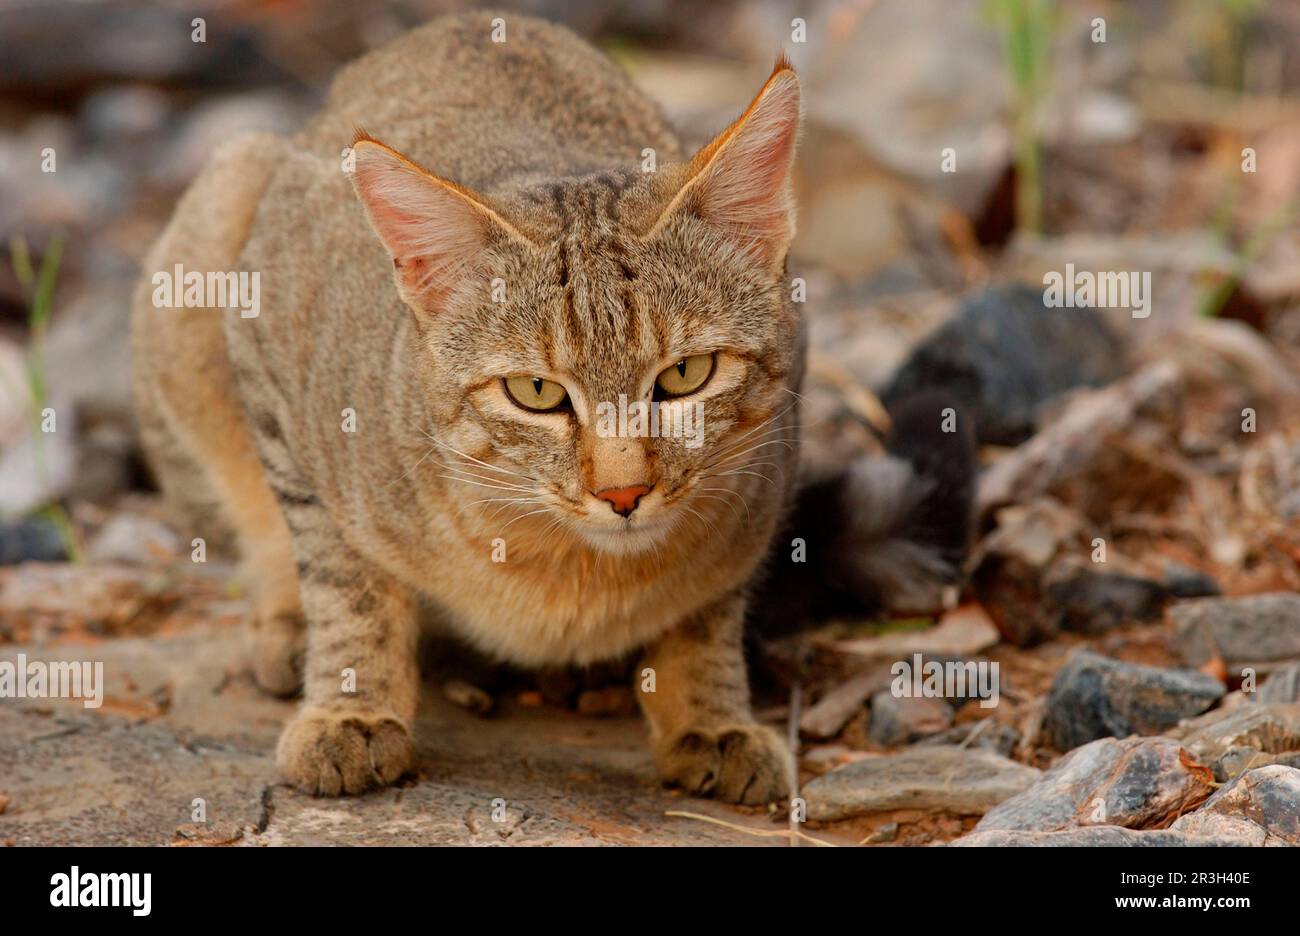 African wildcats (Felis silvestris lybica), Falcon cat, Falcon cats, Predatory cats, Predators, Mammals, Animals Wild cat close-up of adult resting Stock Photo